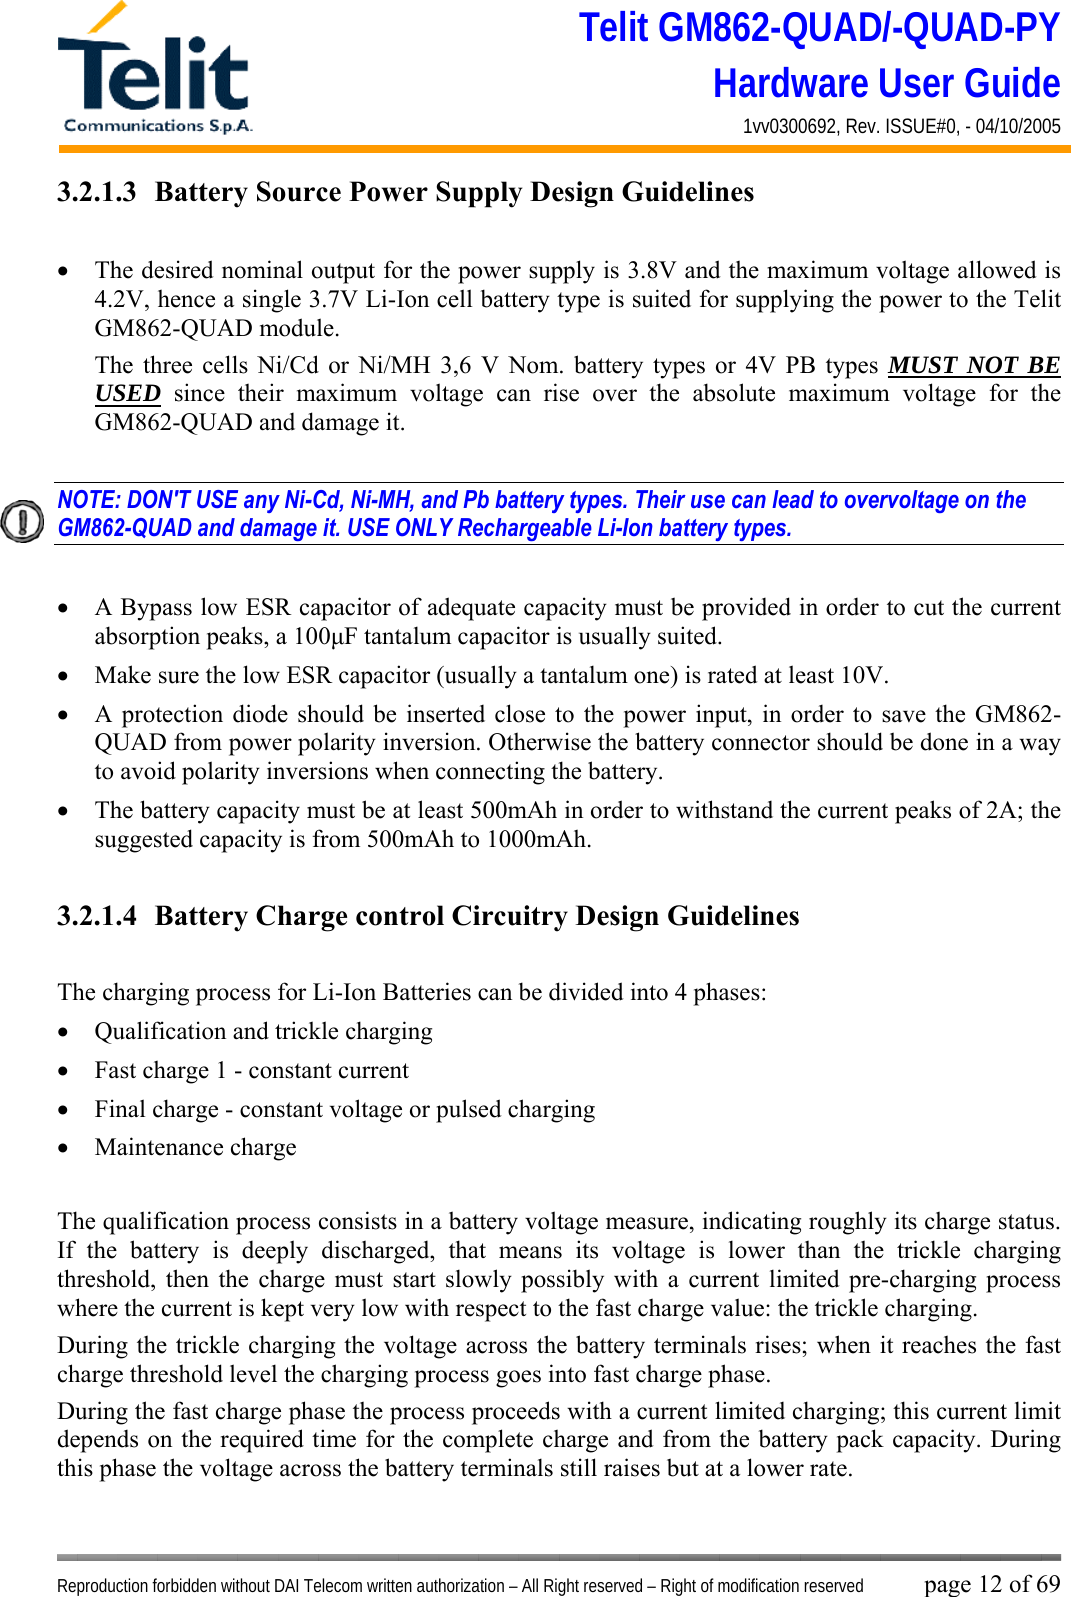 Telit GM862-QUAD/-QUAD-PY Hardware User Guide 1vv0300692, Rev. ISSUE#0, - 04/10/2005   Reproduction forbidden without DAI Telecom written authorization – All Right reserved – Right of modification reserved page 12 of 69 3.2.1.3  Battery Source Power Supply Design Guidelines  •  The desired nominal output for the power supply is 3.8V and the maximum voltage allowed is 4.2V, hence a single 3.7V Li-Ion cell battery type is suited for supplying the power to the Telit GM862-QUAD module. The three cells Ni/Cd or Ni/MH 3,6 V Nom. battery types or 4V PB types MUST NOT BE USED since their maximum voltage can rise over the absolute maximum voltage for the GM862-QUAD and damage it.  NOTE: DON&apos;T USE any Ni-Cd, Ni-MH, and Pb battery types. Their use can lead to overvoltage on the GM862-QUAD and damage it. USE ONLY Rechargeable Li-Ion battery types.  •  A Bypass low ESR capacitor of adequate capacity must be provided in order to cut the current absorption peaks, a 100μF tantalum capacitor is usually suited. •  Make sure the low ESR capacitor (usually a tantalum one) is rated at least 10V. •  A protection diode should be inserted close to the power input, in order to save the GM862-QUAD from power polarity inversion. Otherwise the battery connector should be done in a way to avoid polarity inversions when connecting the battery. •  The battery capacity must be at least 500mAh in order to withstand the current peaks of 2A; the suggested capacity is from 500mAh to 1000mAh.  3.2.1.4  Battery Charge control Circuitry Design Guidelines  The charging process for Li-Ion Batteries can be divided into 4 phases: •  Qualification and trickle charging •  Fast charge 1 - constant current •  Final charge - constant voltage or pulsed charging •  Maintenance charge   The qualification process consists in a battery voltage measure, indicating roughly its charge status. If the battery is deeply discharged, that means its voltage is lower than the trickle charging threshold, then the charge must start slowly possibly with a current limited pre-charging process where the current is kept very low with respect to the fast charge value: the trickle charging. During the trickle charging the voltage across the battery terminals rises; when it reaches the fast charge threshold level the charging process goes into fast charge phase. During the fast charge phase the process proceeds with a current limited charging; this current limit depends on the required time for the complete charge and from the battery pack capacity. During this phase the voltage across the battery terminals still raises but at a lower rate. 